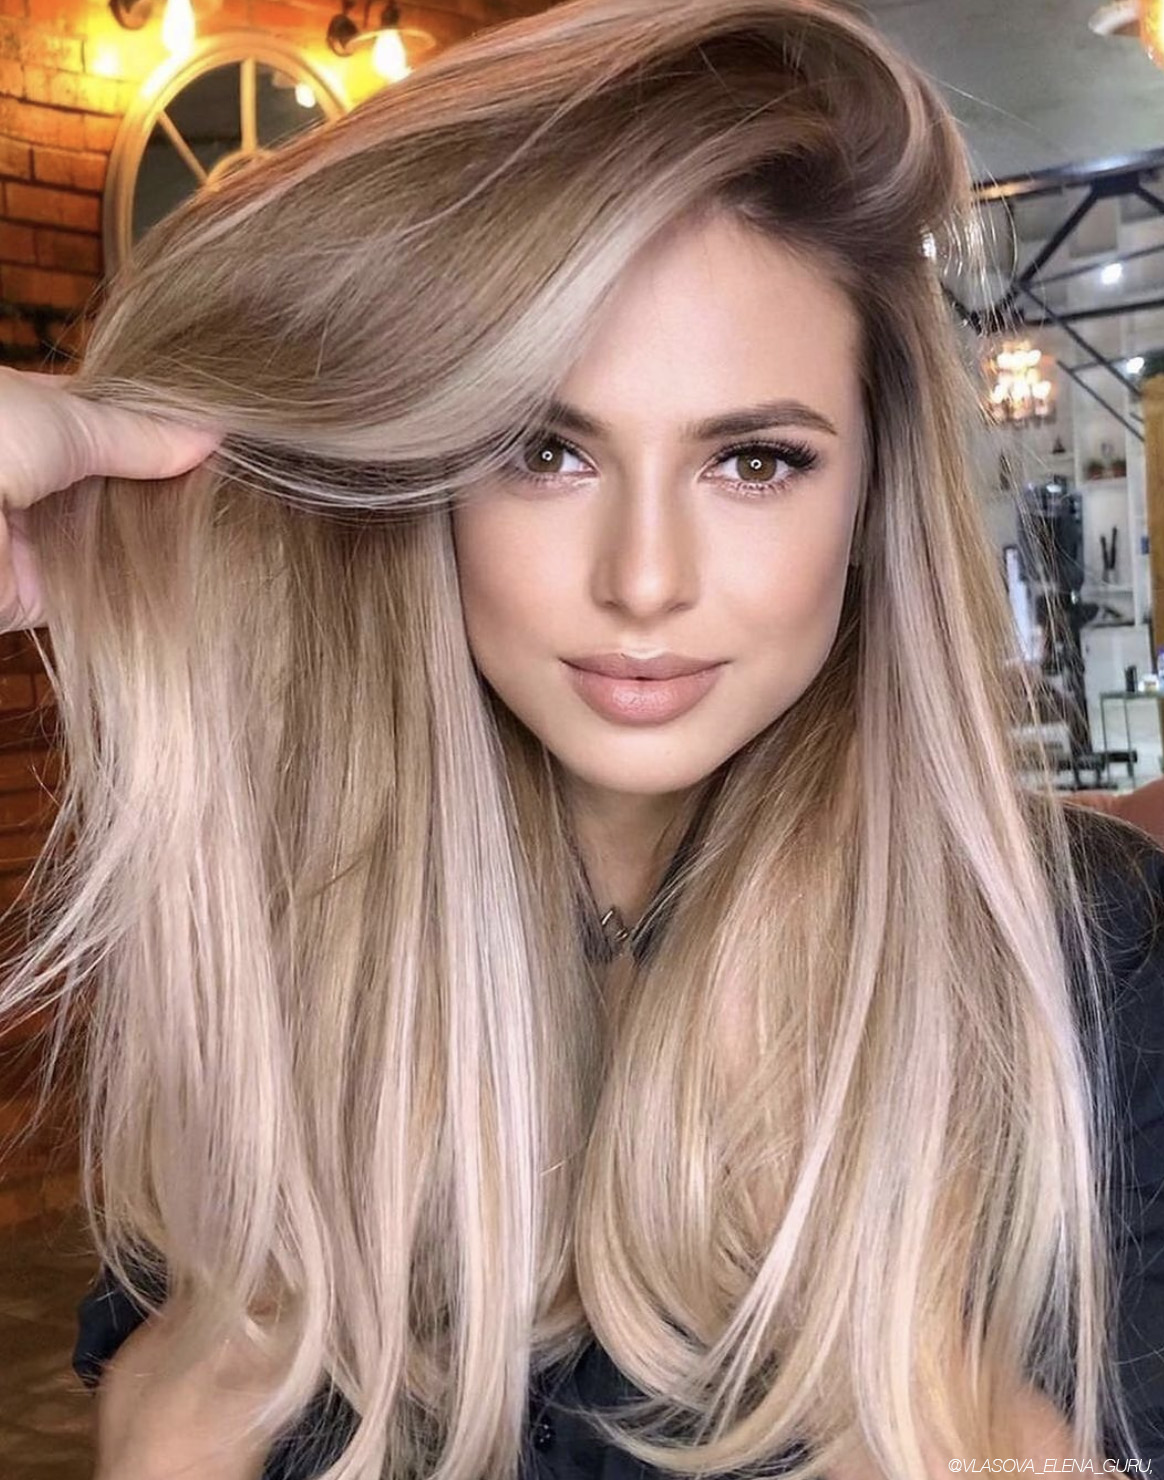 How To Create Blonde Without Bleach - Bangstyle - House of Hair Inspiration